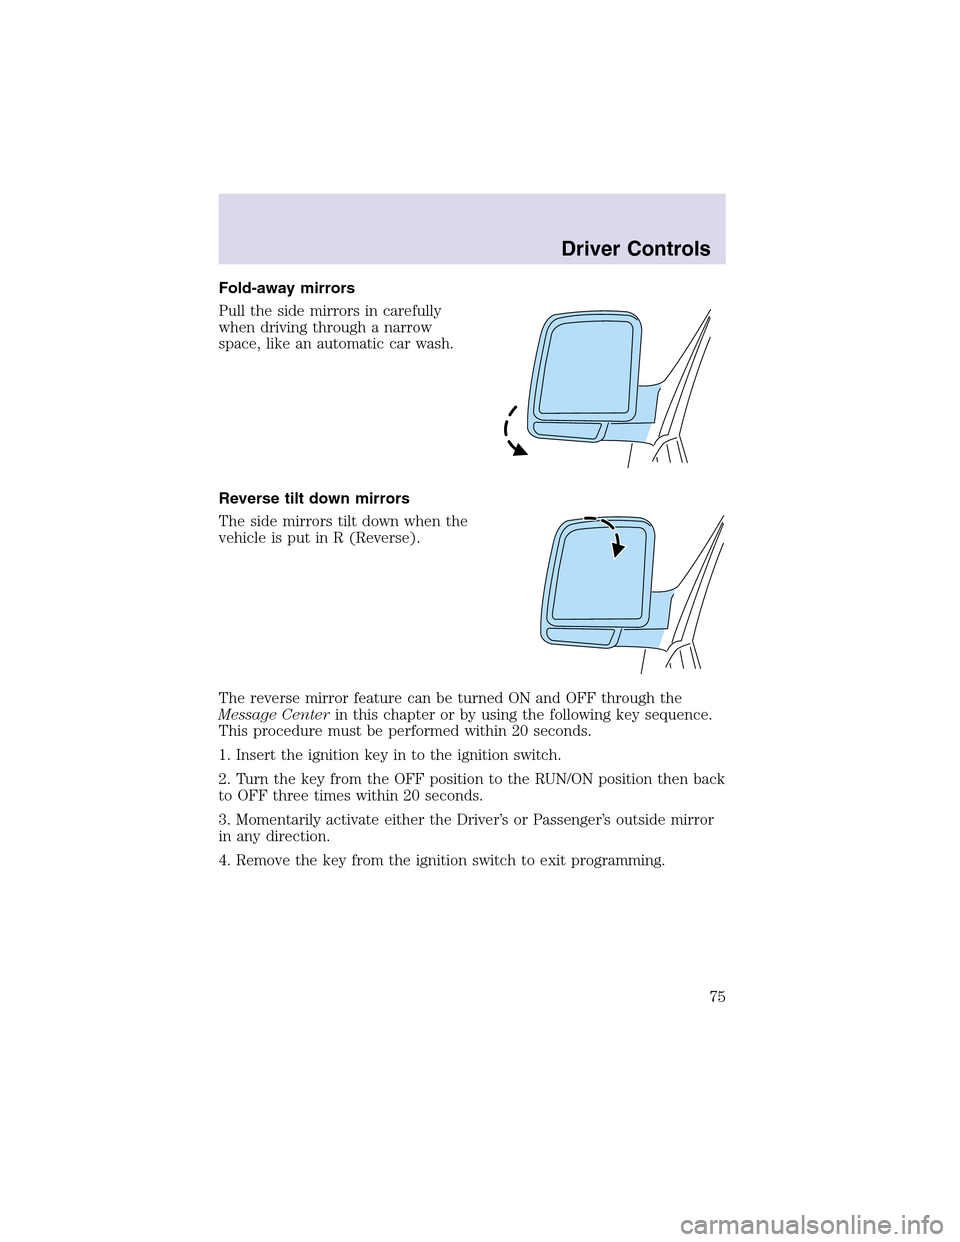 LINCOLN AVIATOR 2003 Manual PDF Fold-away mirrors
Pull the side mirrors in carefully
when driving through a narrow
space, like an automatic car wash.
Reverse tilt down mirrors
The side mirrors tilt down when the
vehicle is put in R 